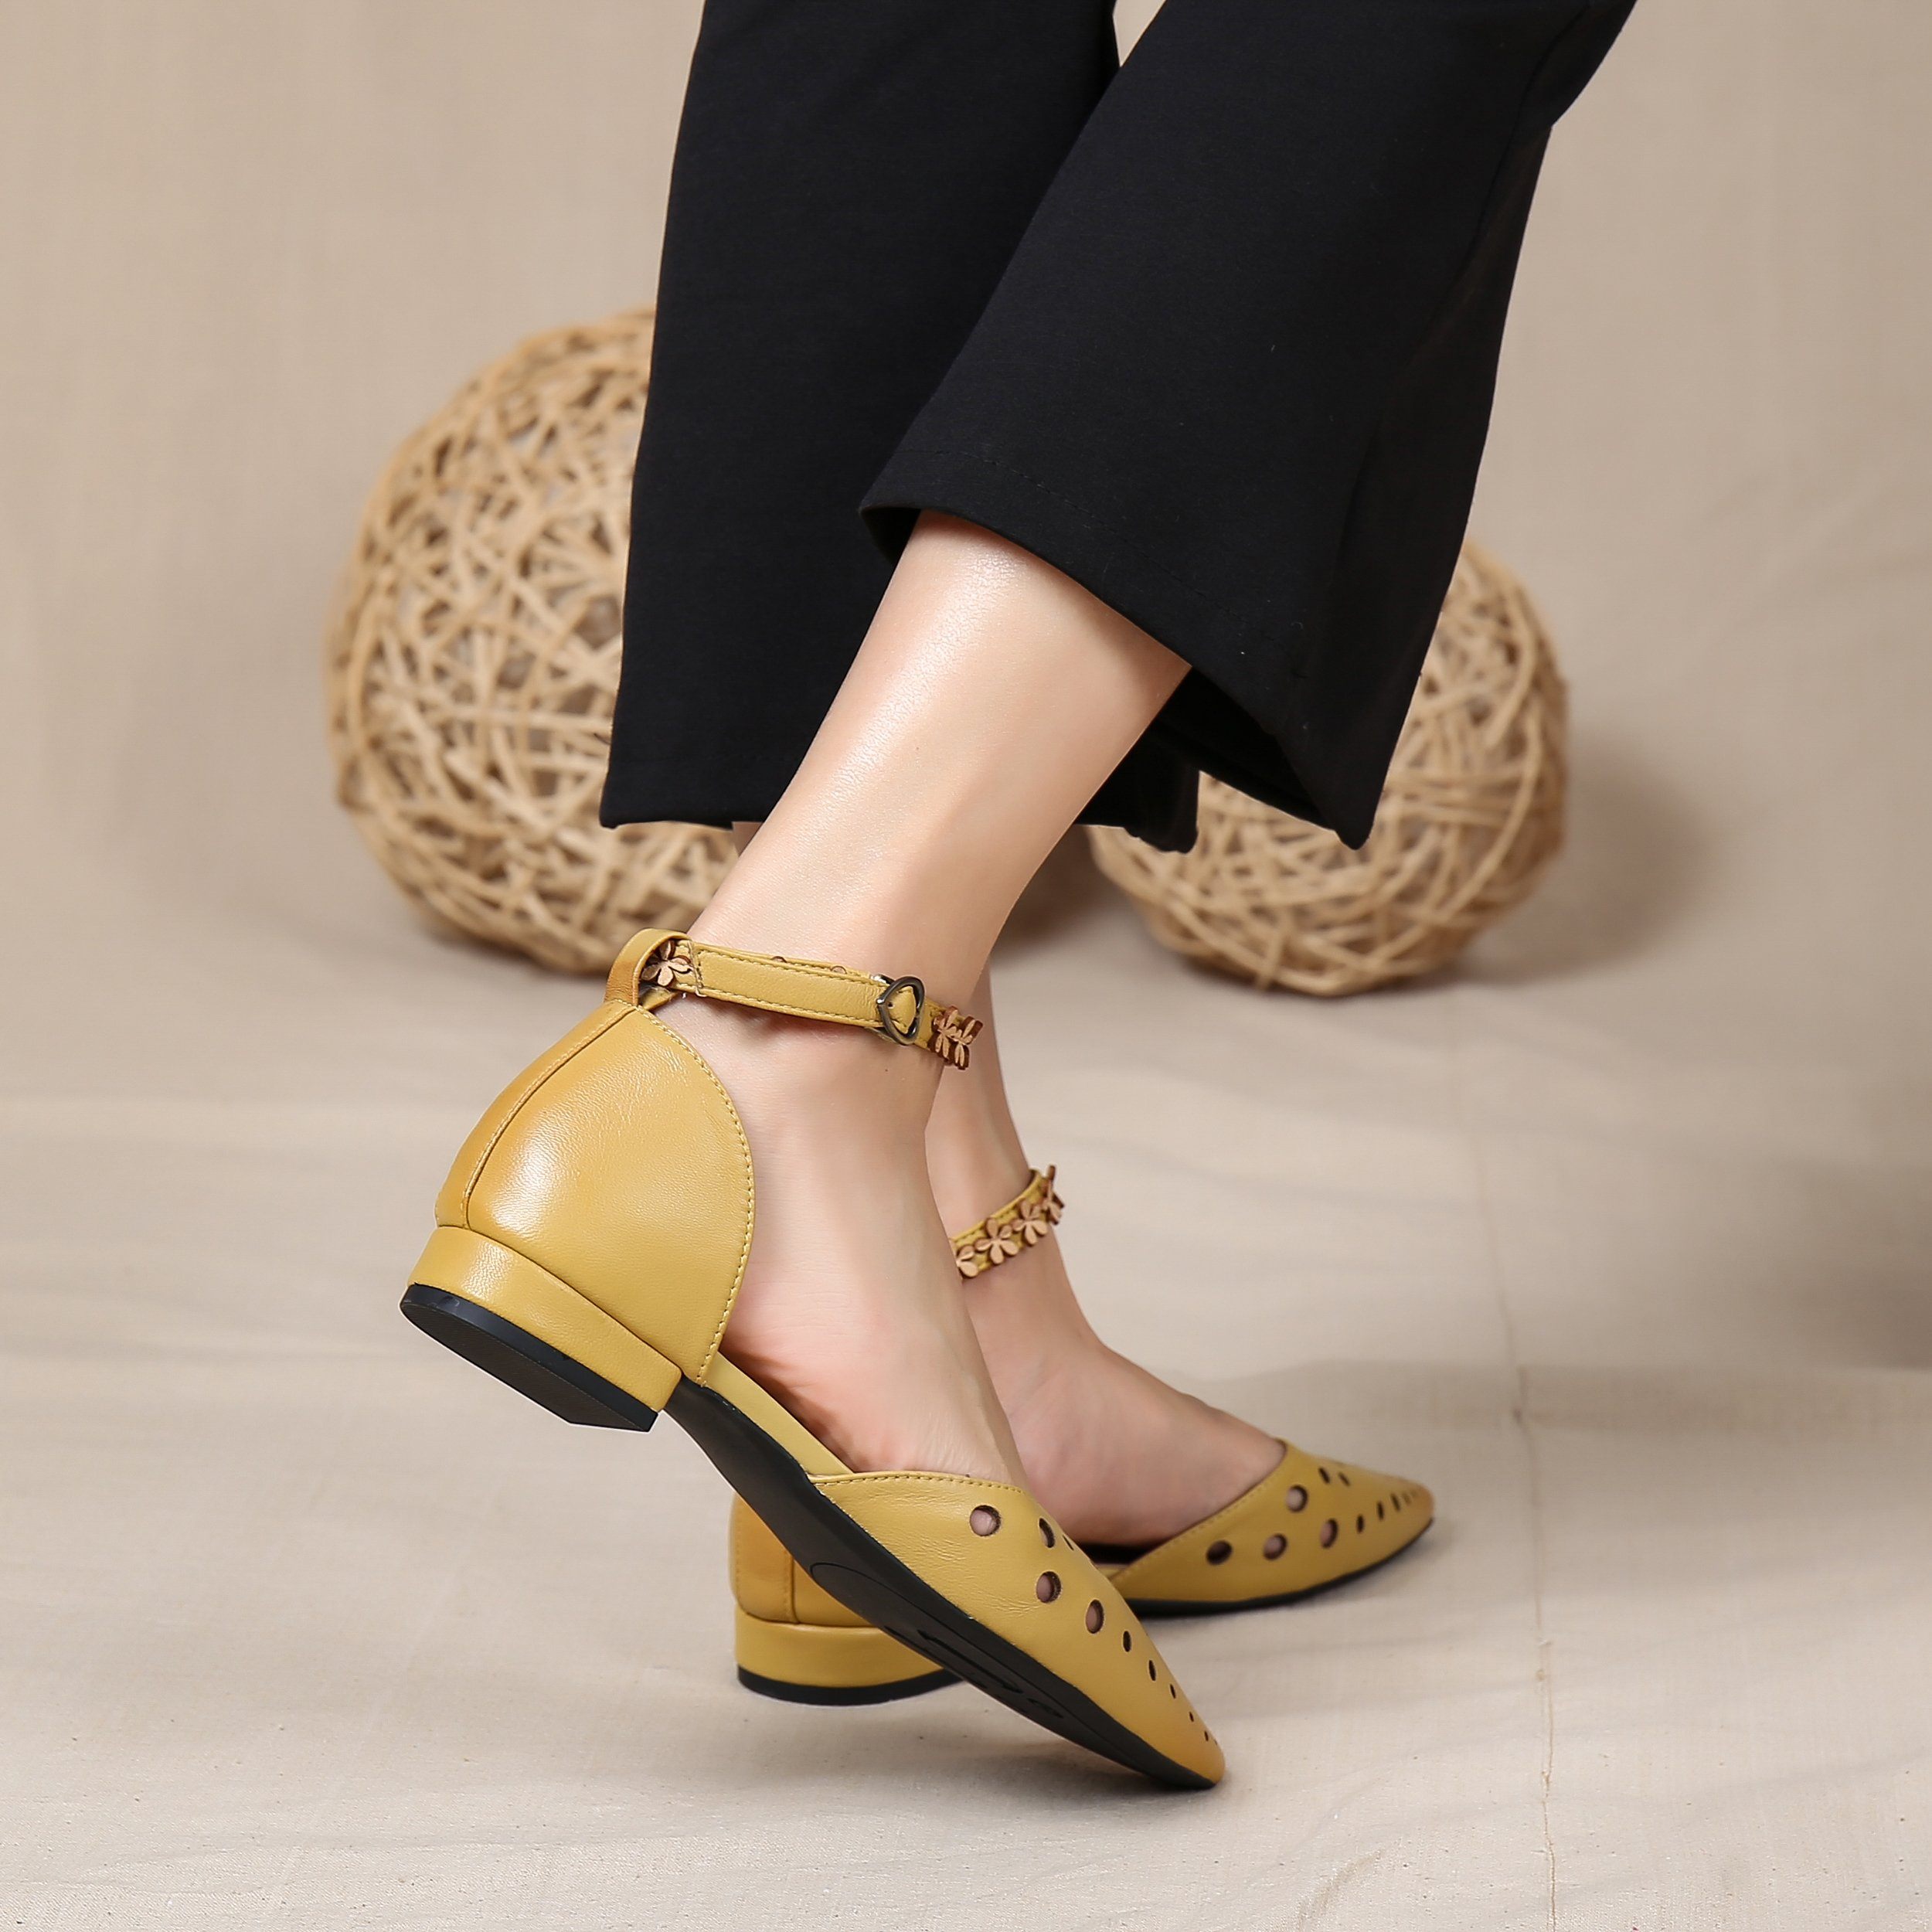 Handmade Flat Sandals Genuine Hollow Out Pointed Toe Buckle Strap Ladies Summer Shoes